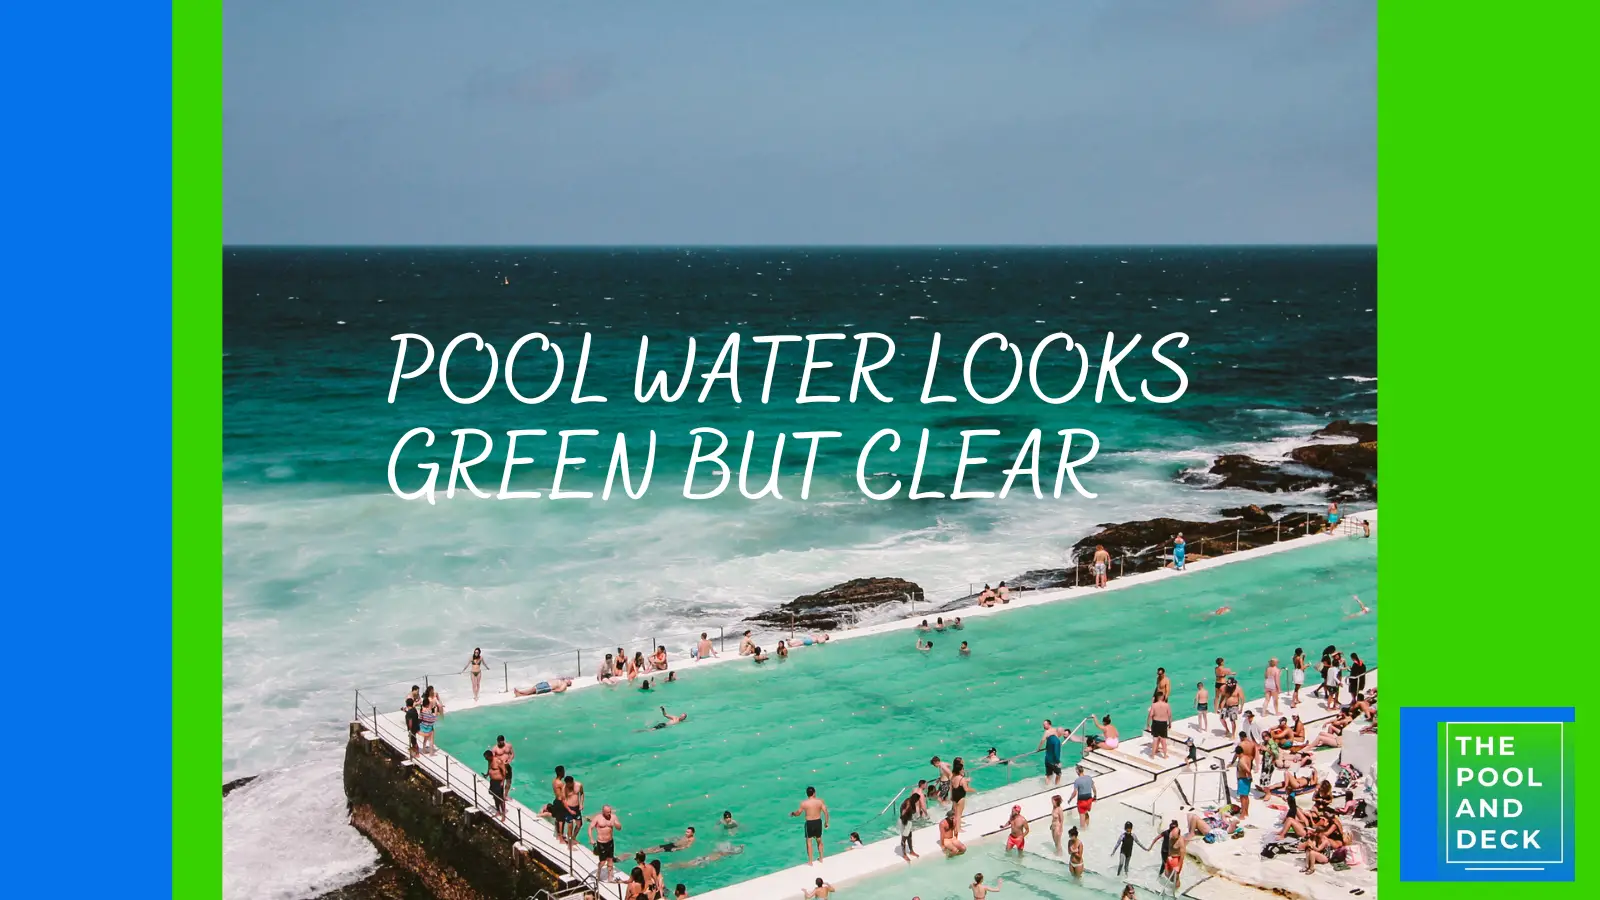 4 Reasons Pool Water Looks Green But Clear & Best Ways to Fix